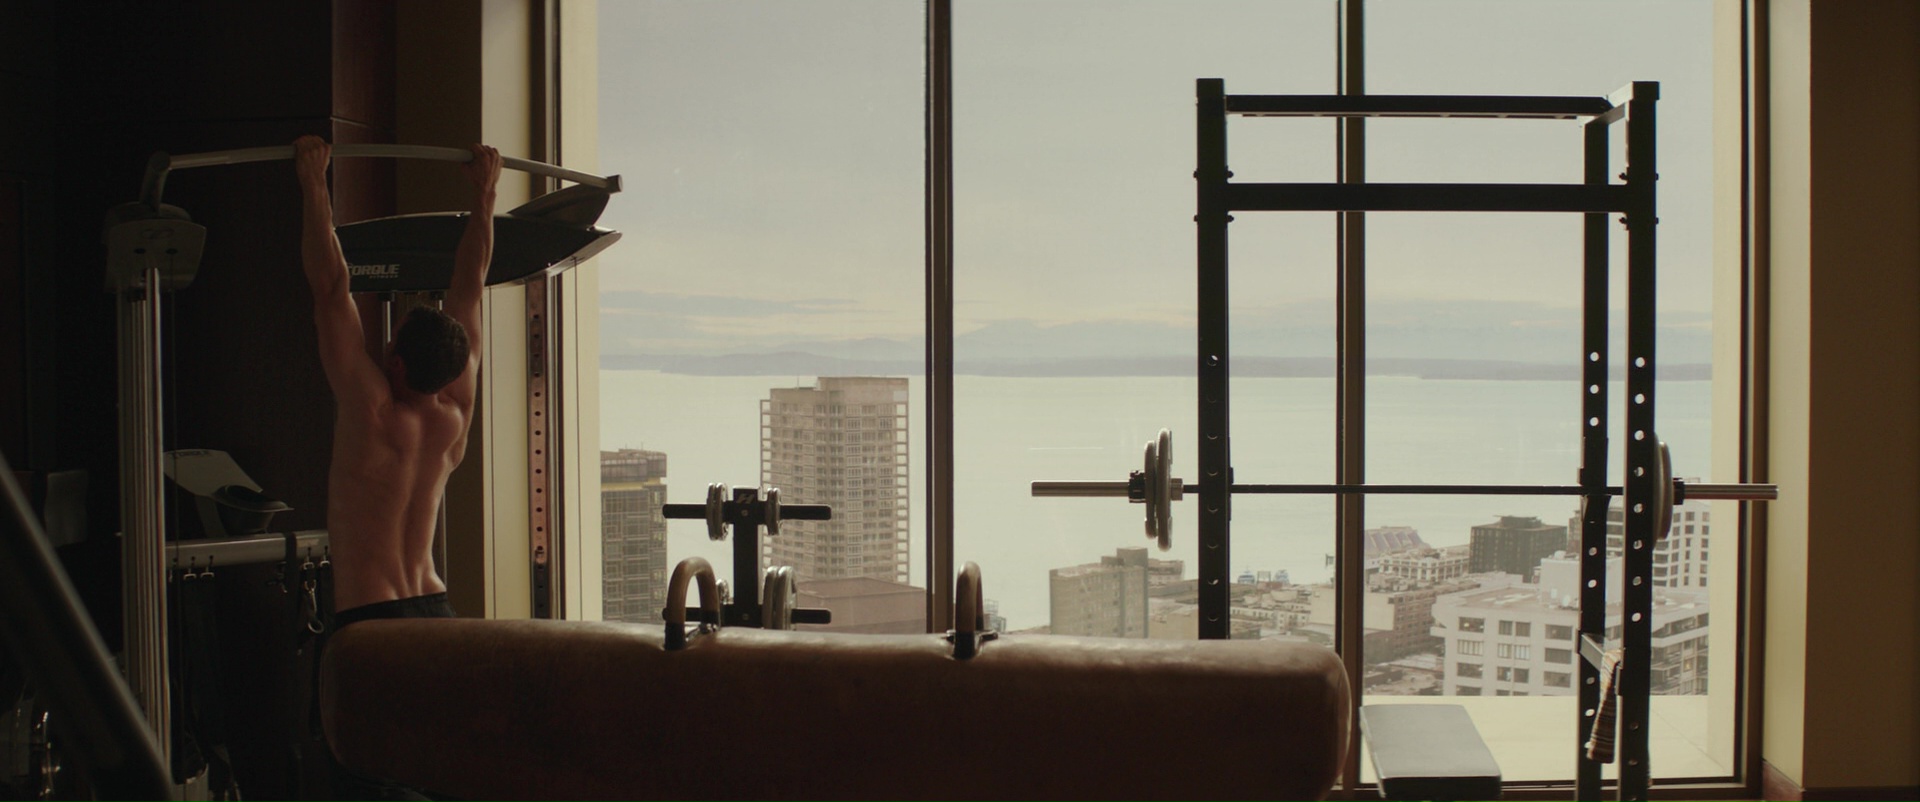 Torque Fitness Training Systems Used by James Dornan (Christian Grey) in Fi...